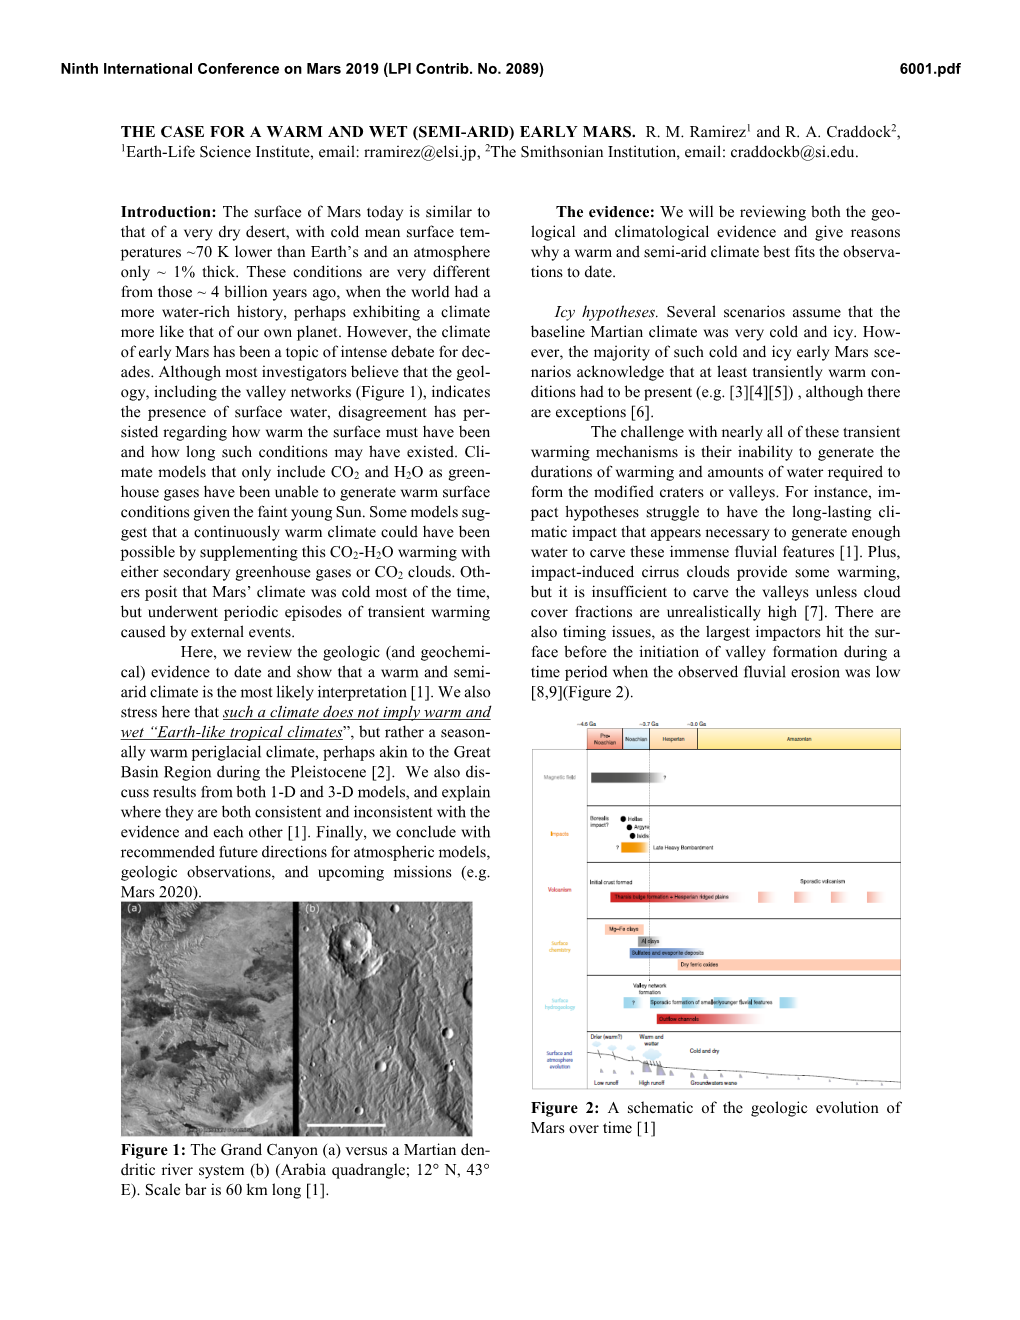 THE CASE for a WARM and WET (SEMI-ARID) EARLY MARS. R. M. Ramirez1 and R